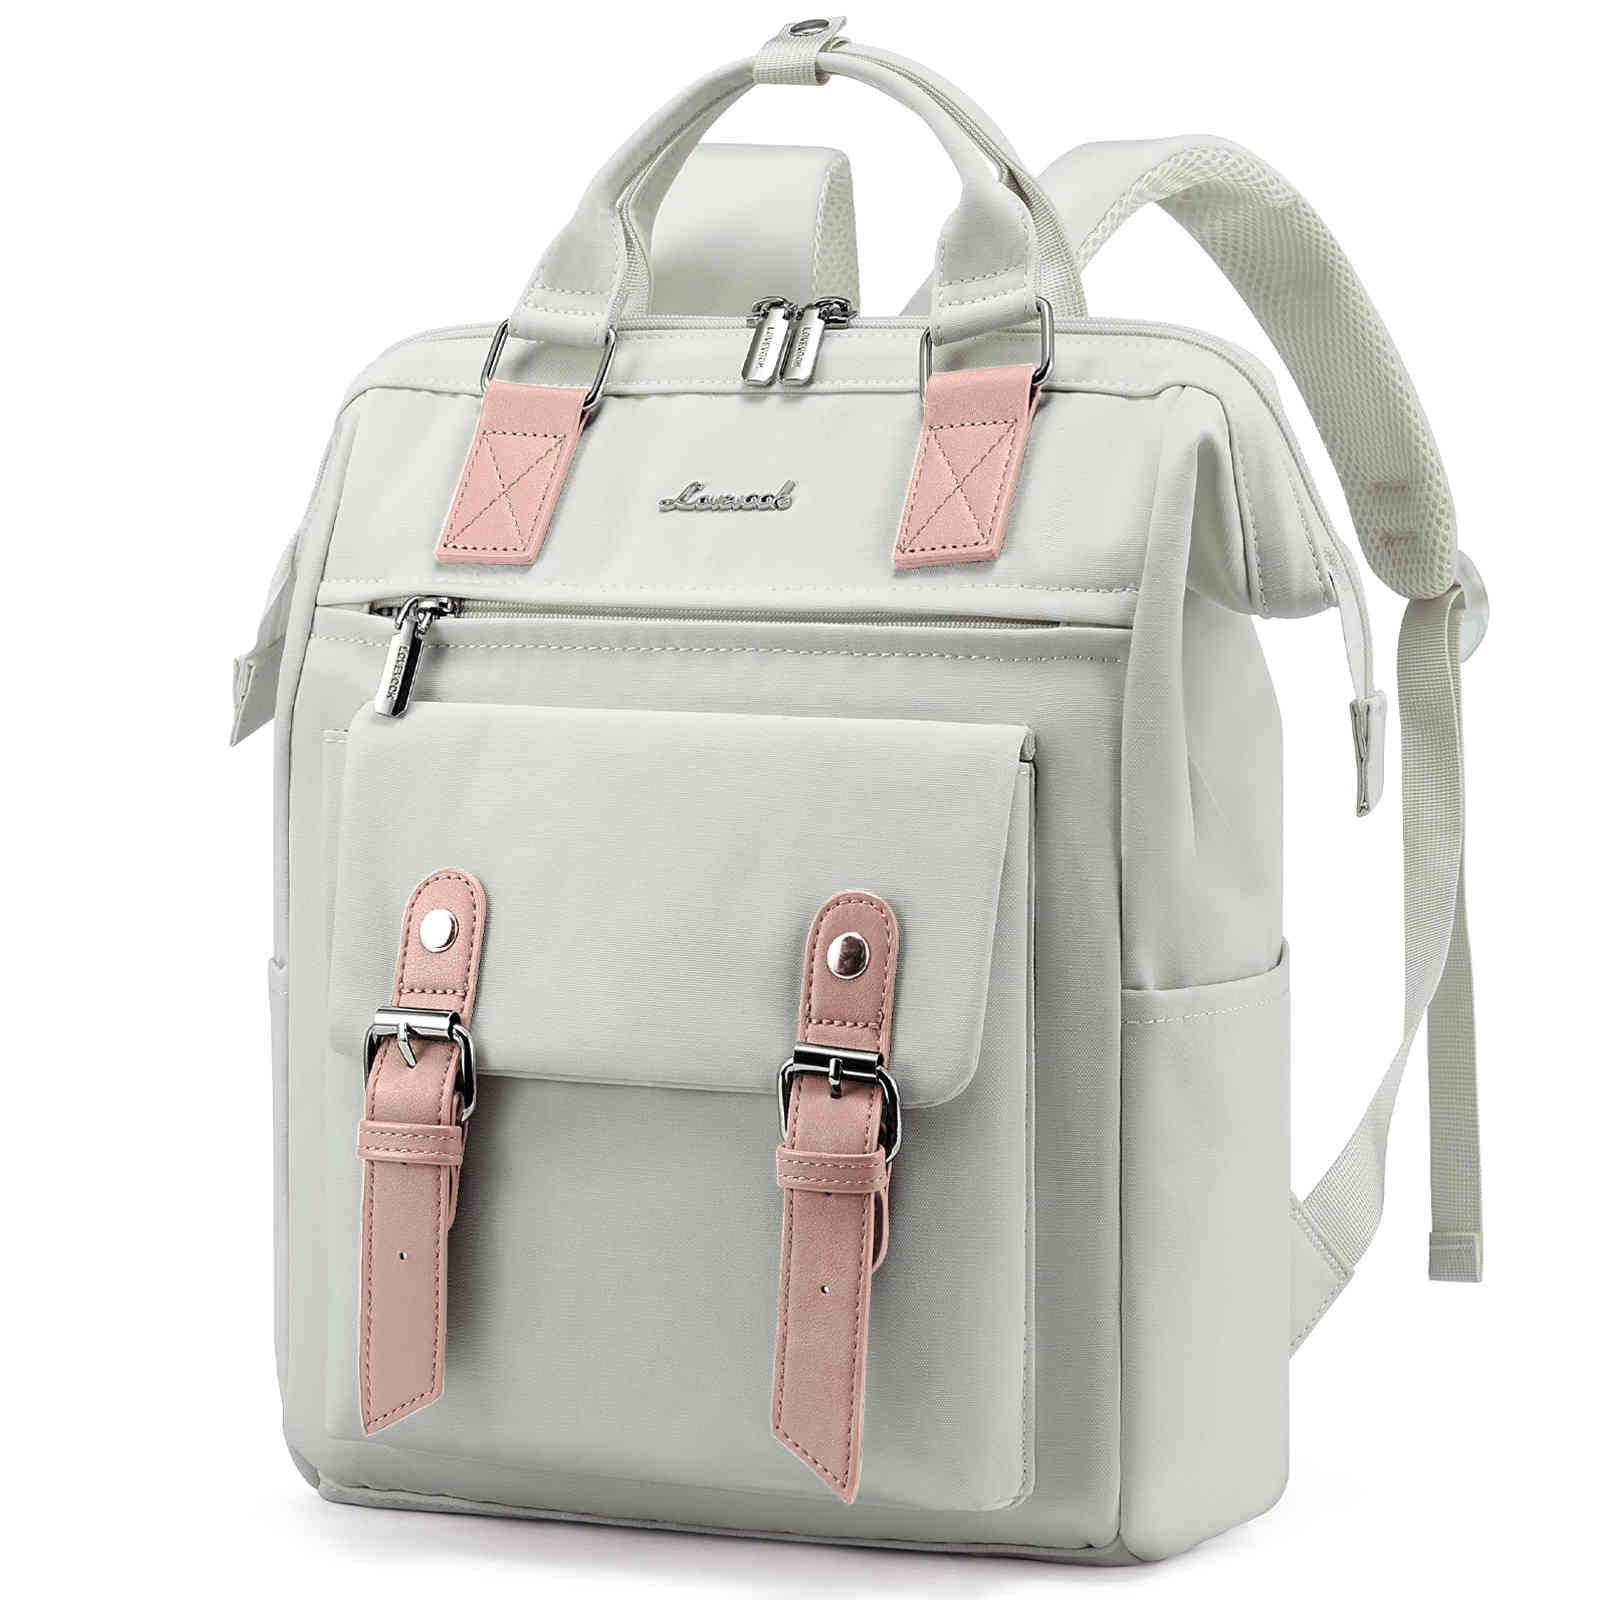 LOVEVOOK Mini Fashion Backpack for Women, Fit 13.3 inch Laptop